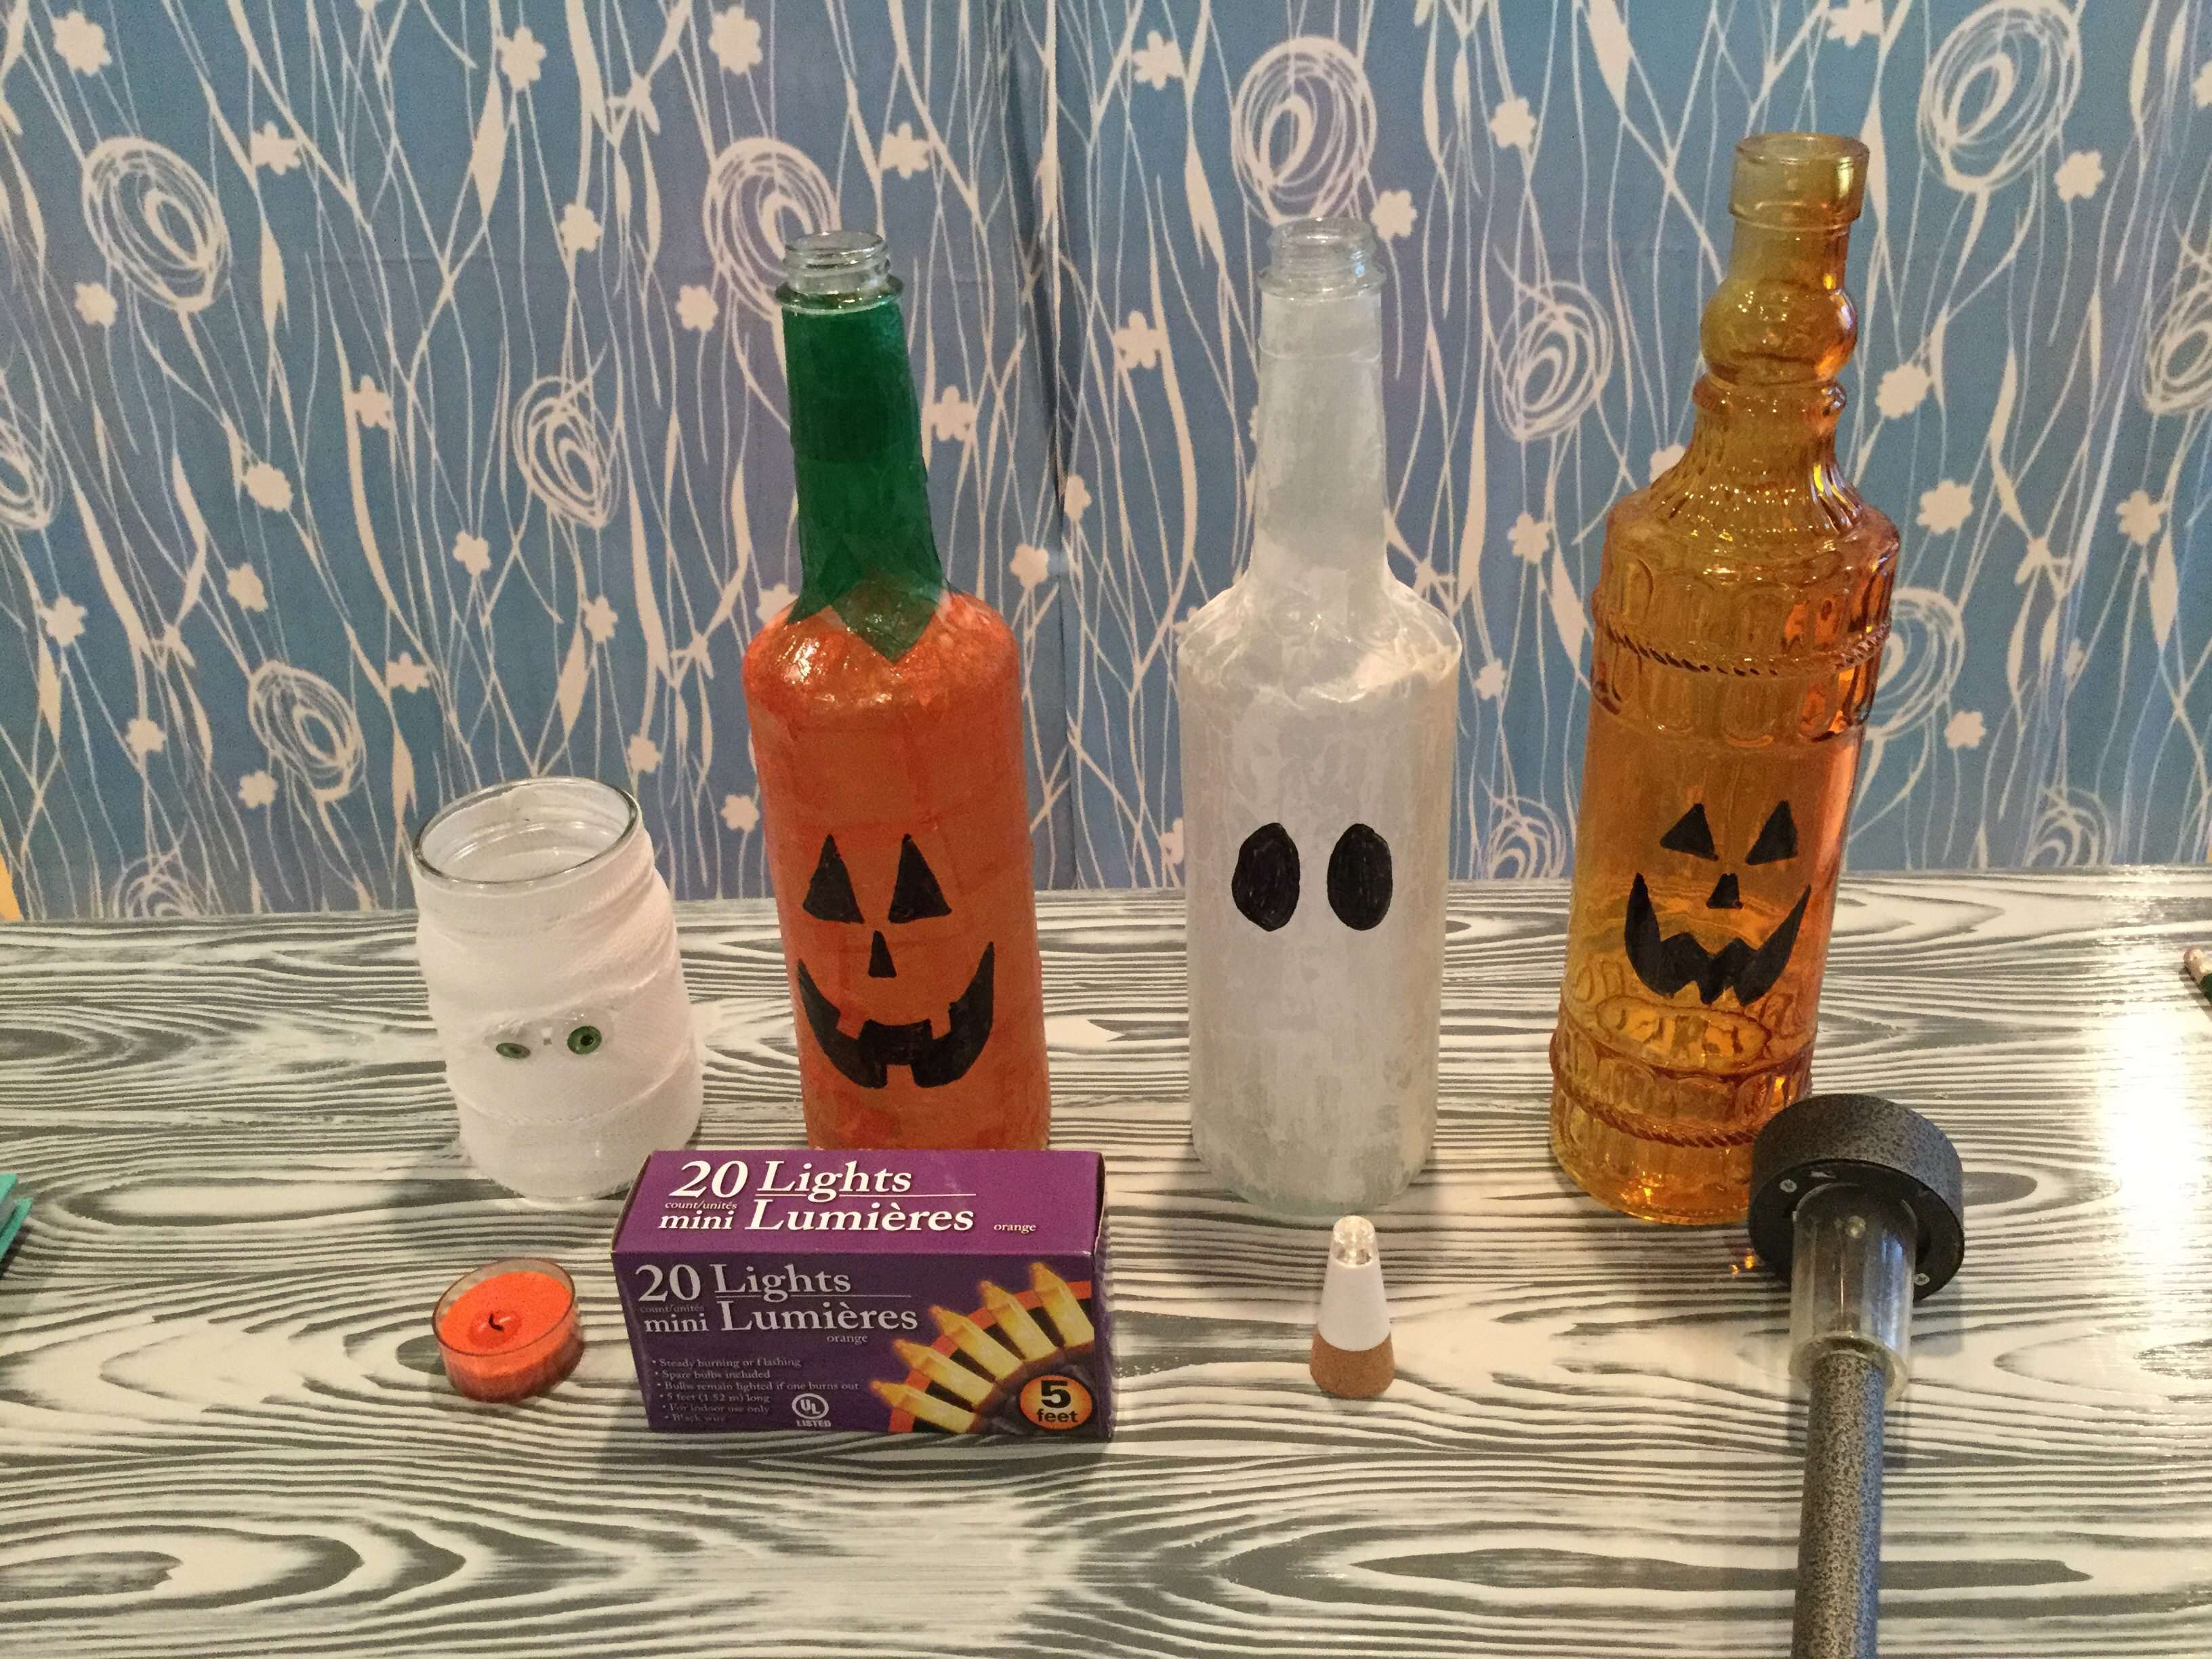 This is how I lit each of these projects - Mummy - tealight (or battery operated tealight) Mod Podge Pumpkin - 20 strand of orange lights Mod Podge Ghost - USB bottle light Orange Bottle Pumpkin - solar light